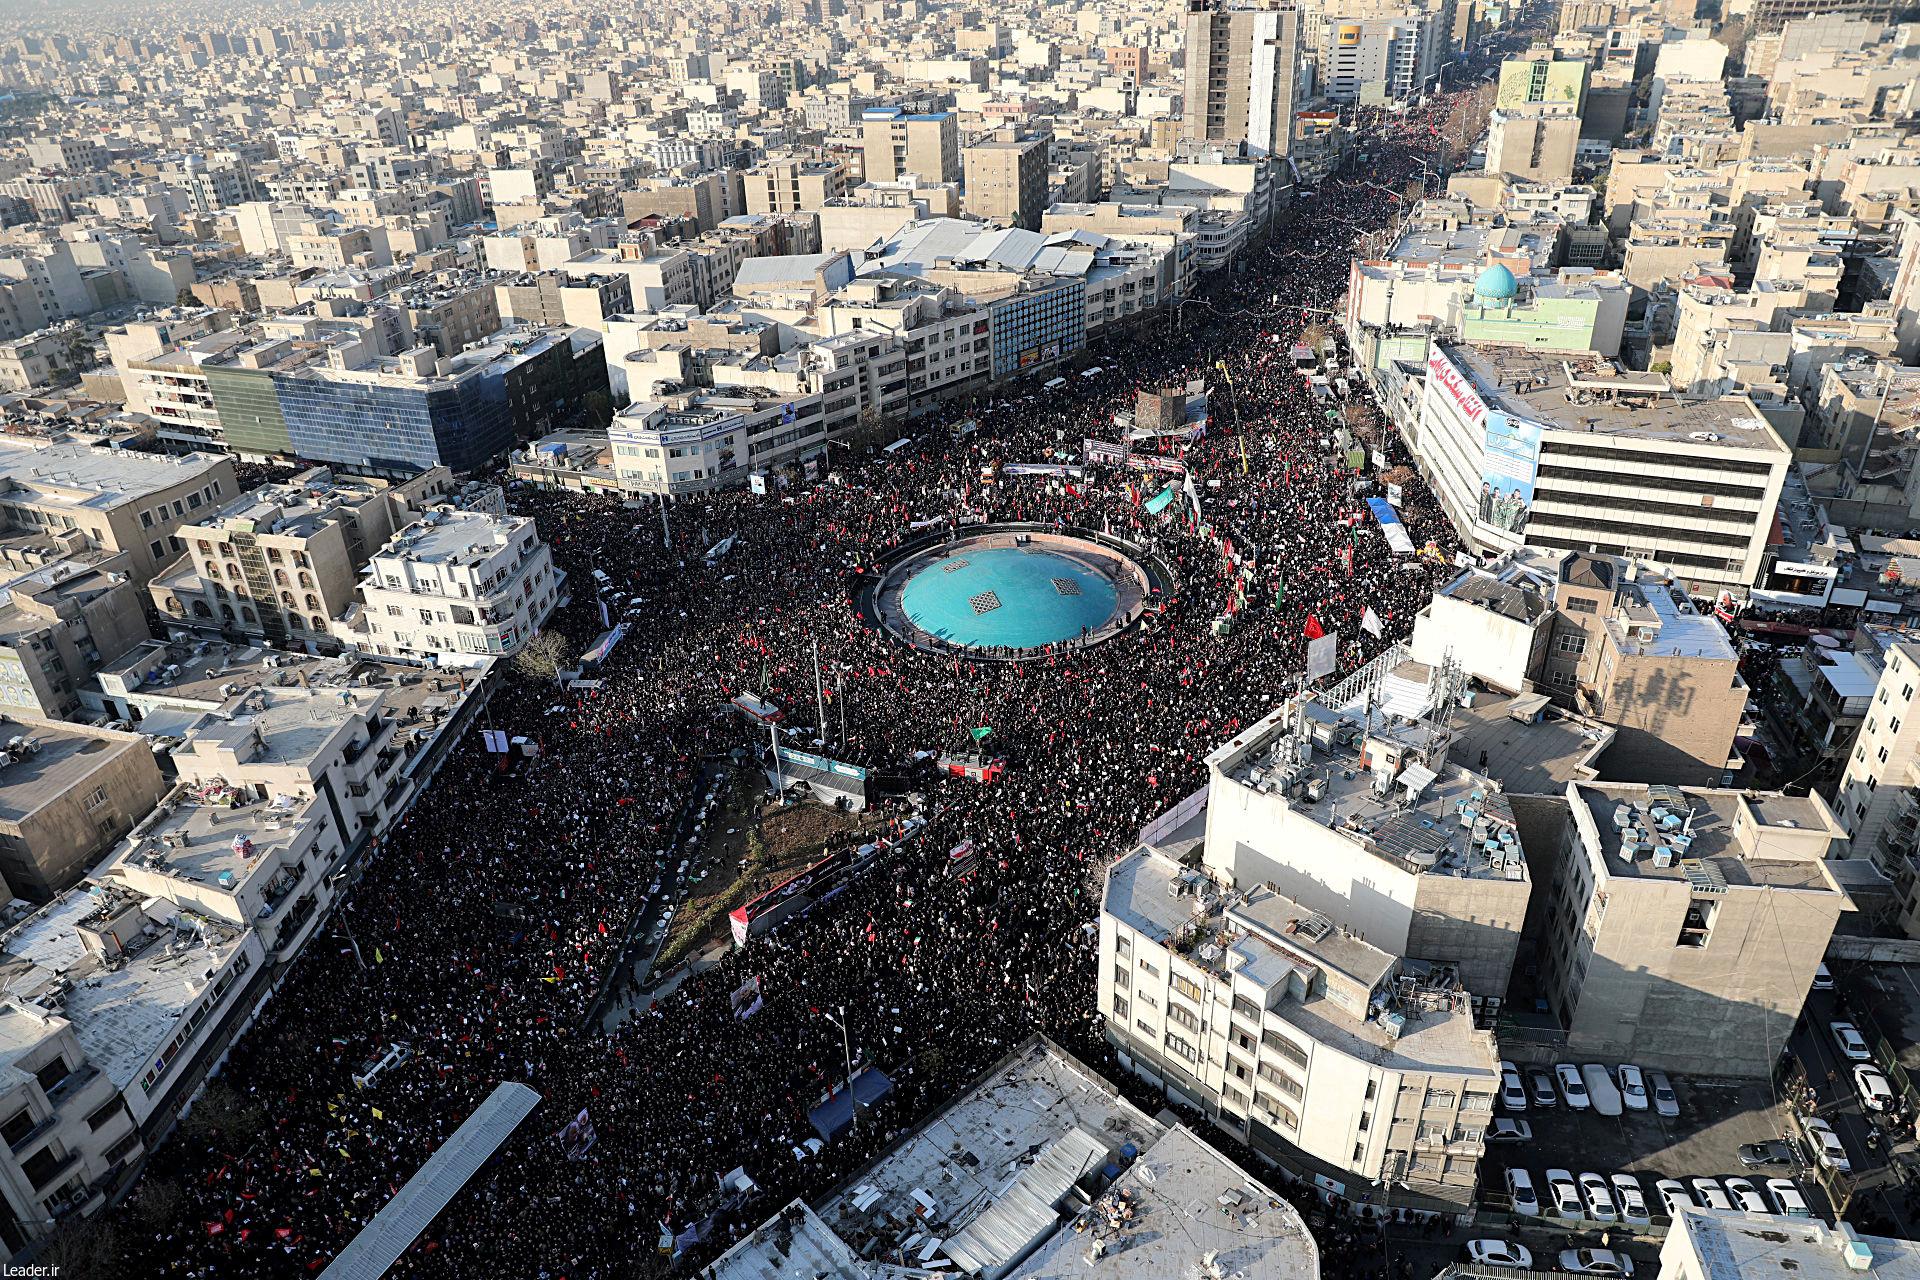 A massive crowd of mourners gathers on the streets of Tehran, Iran. 